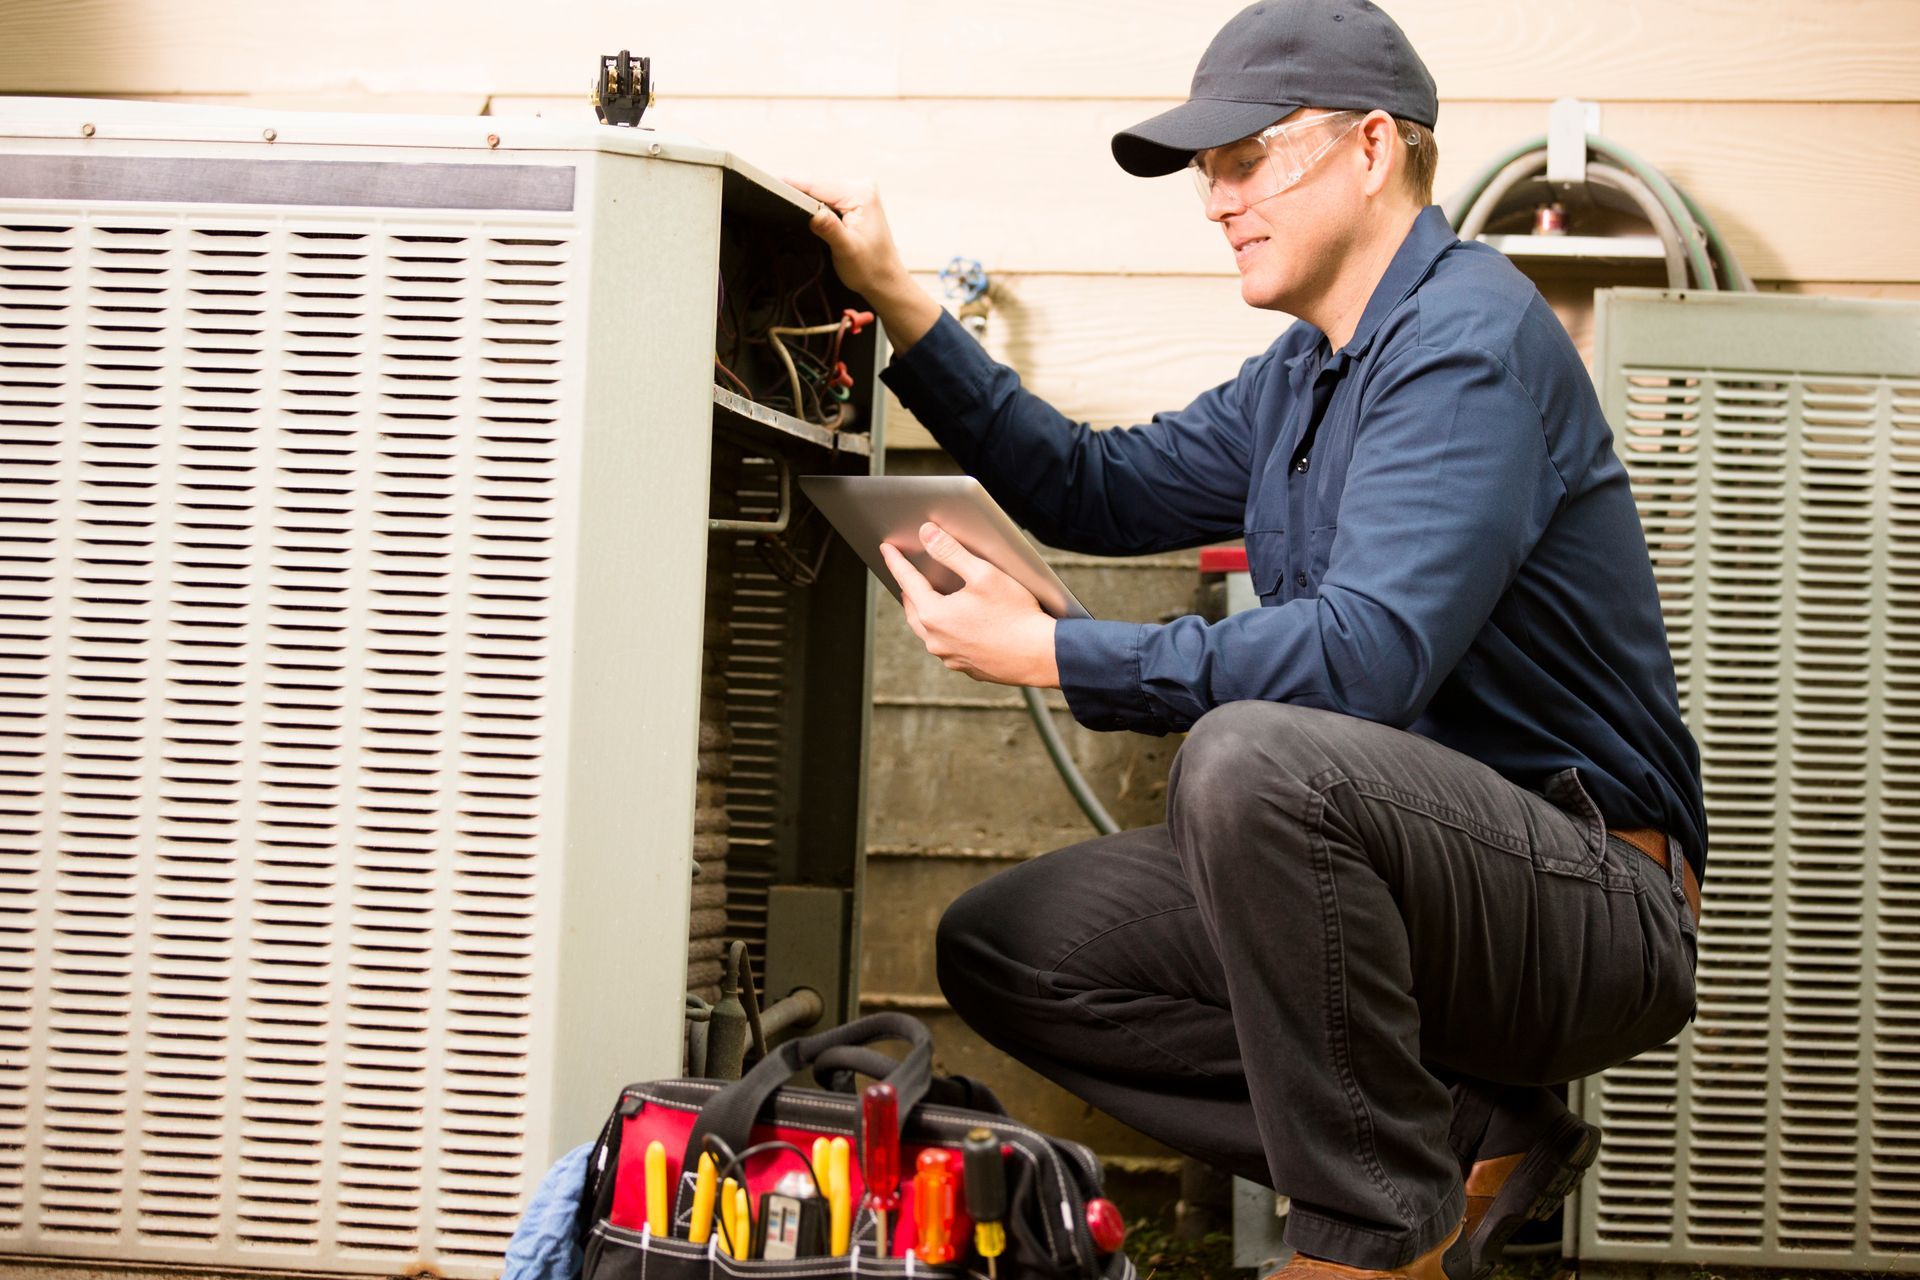 Air conditioner repairman works on home unit Grant AC & Heating